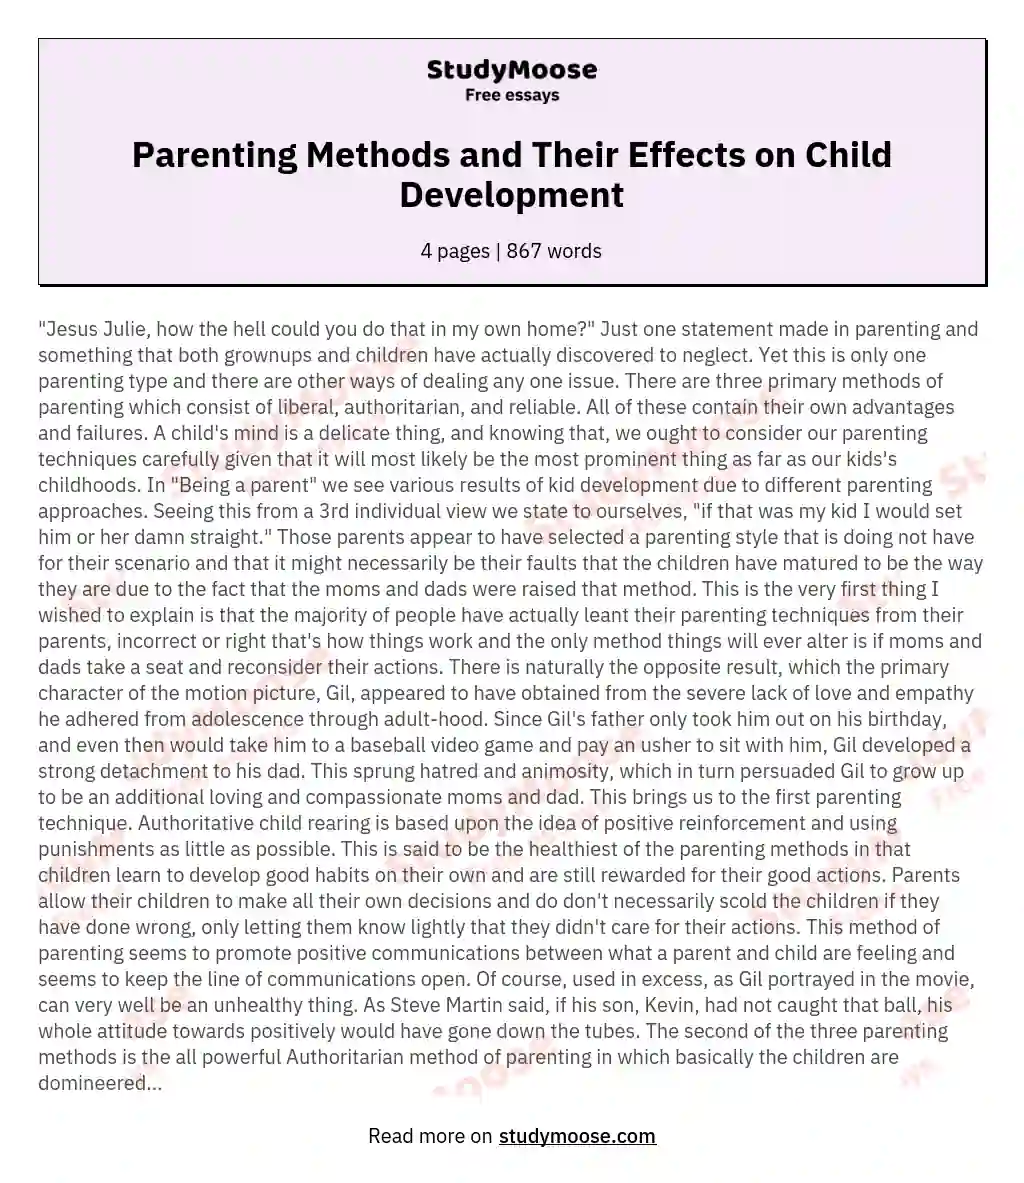 Parenting Methods and Their Effects on Child Development essay